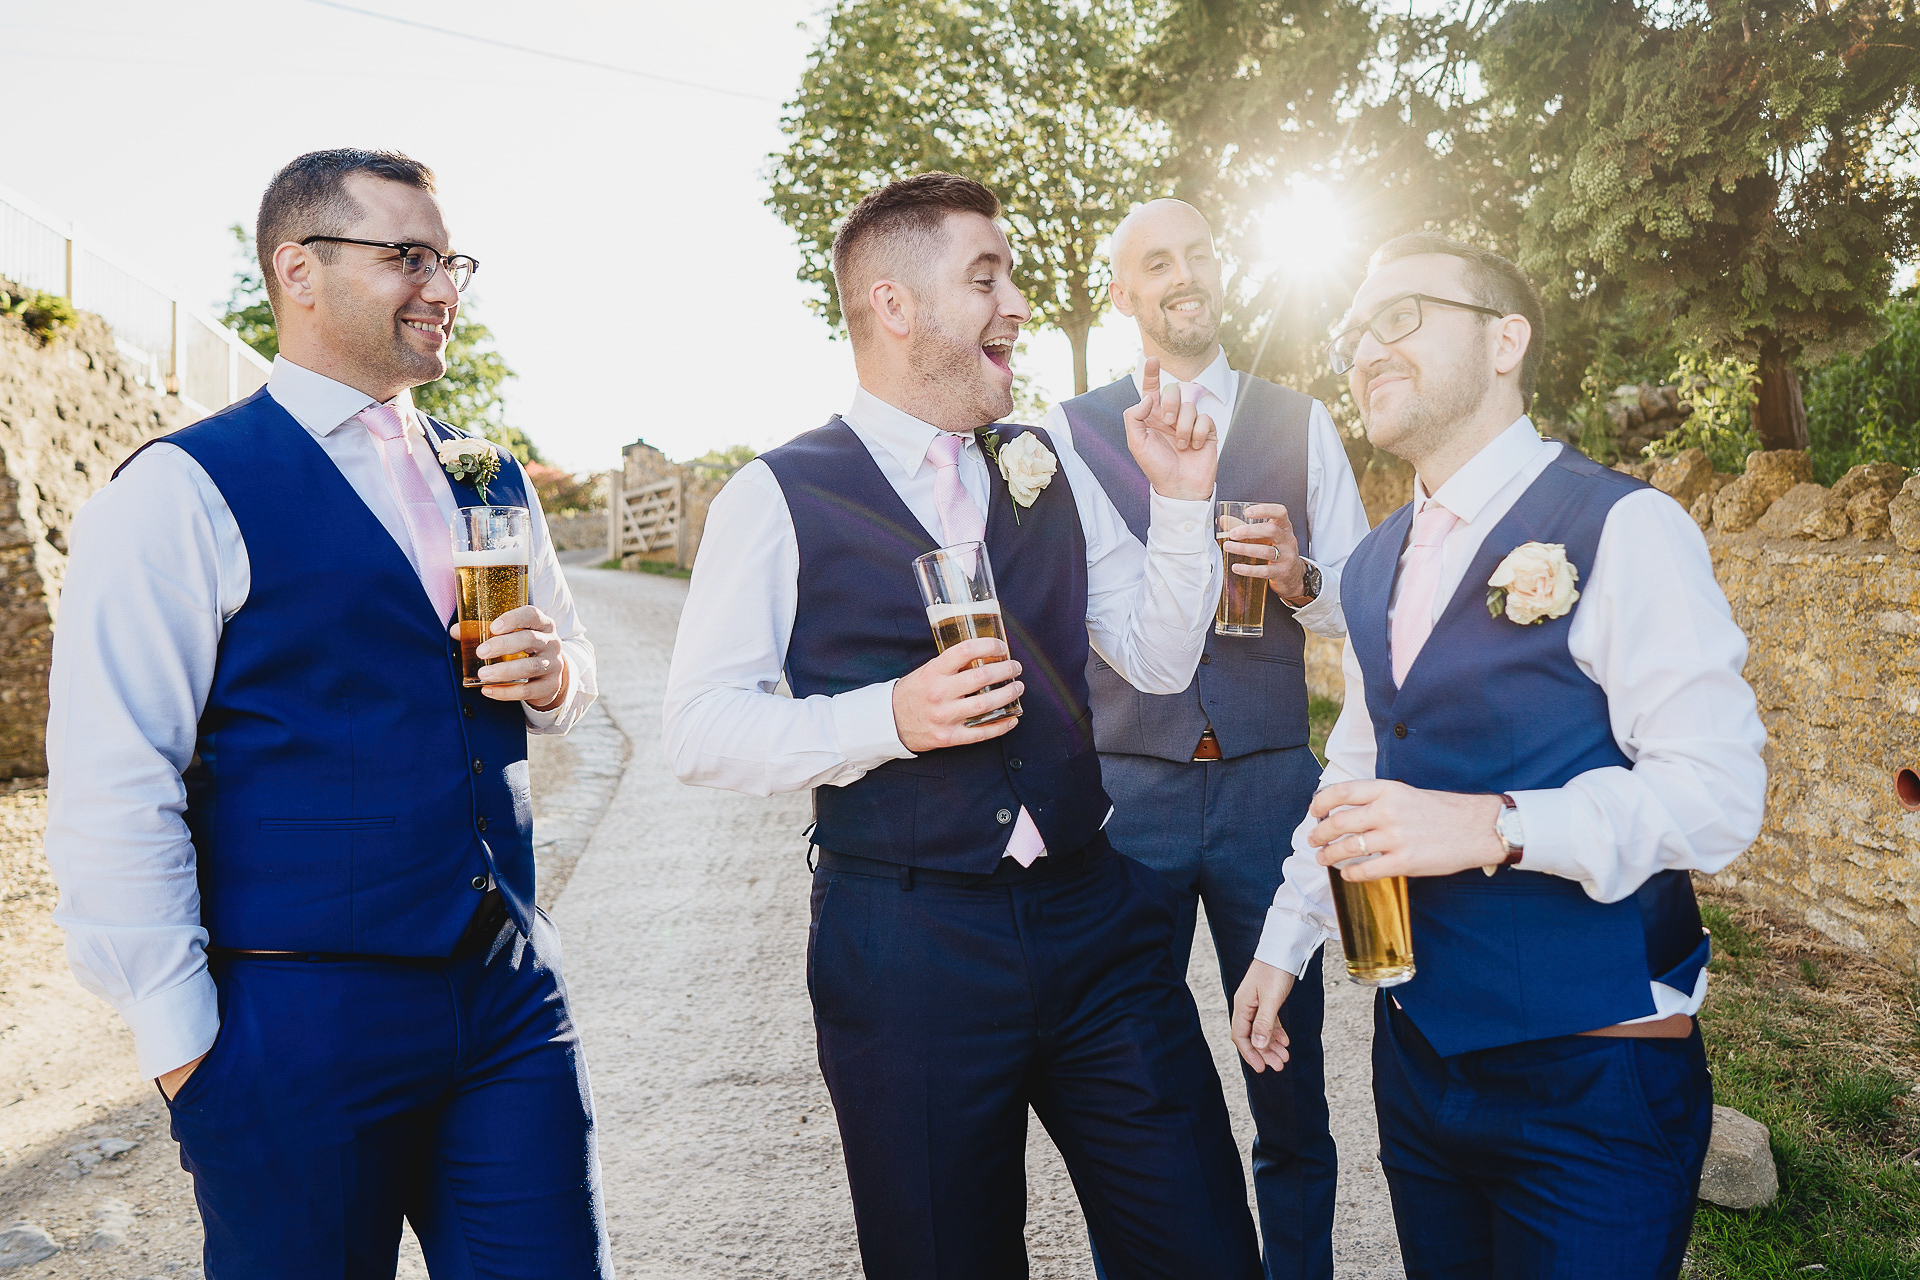 Groom and groomsmen laughing and drinking together